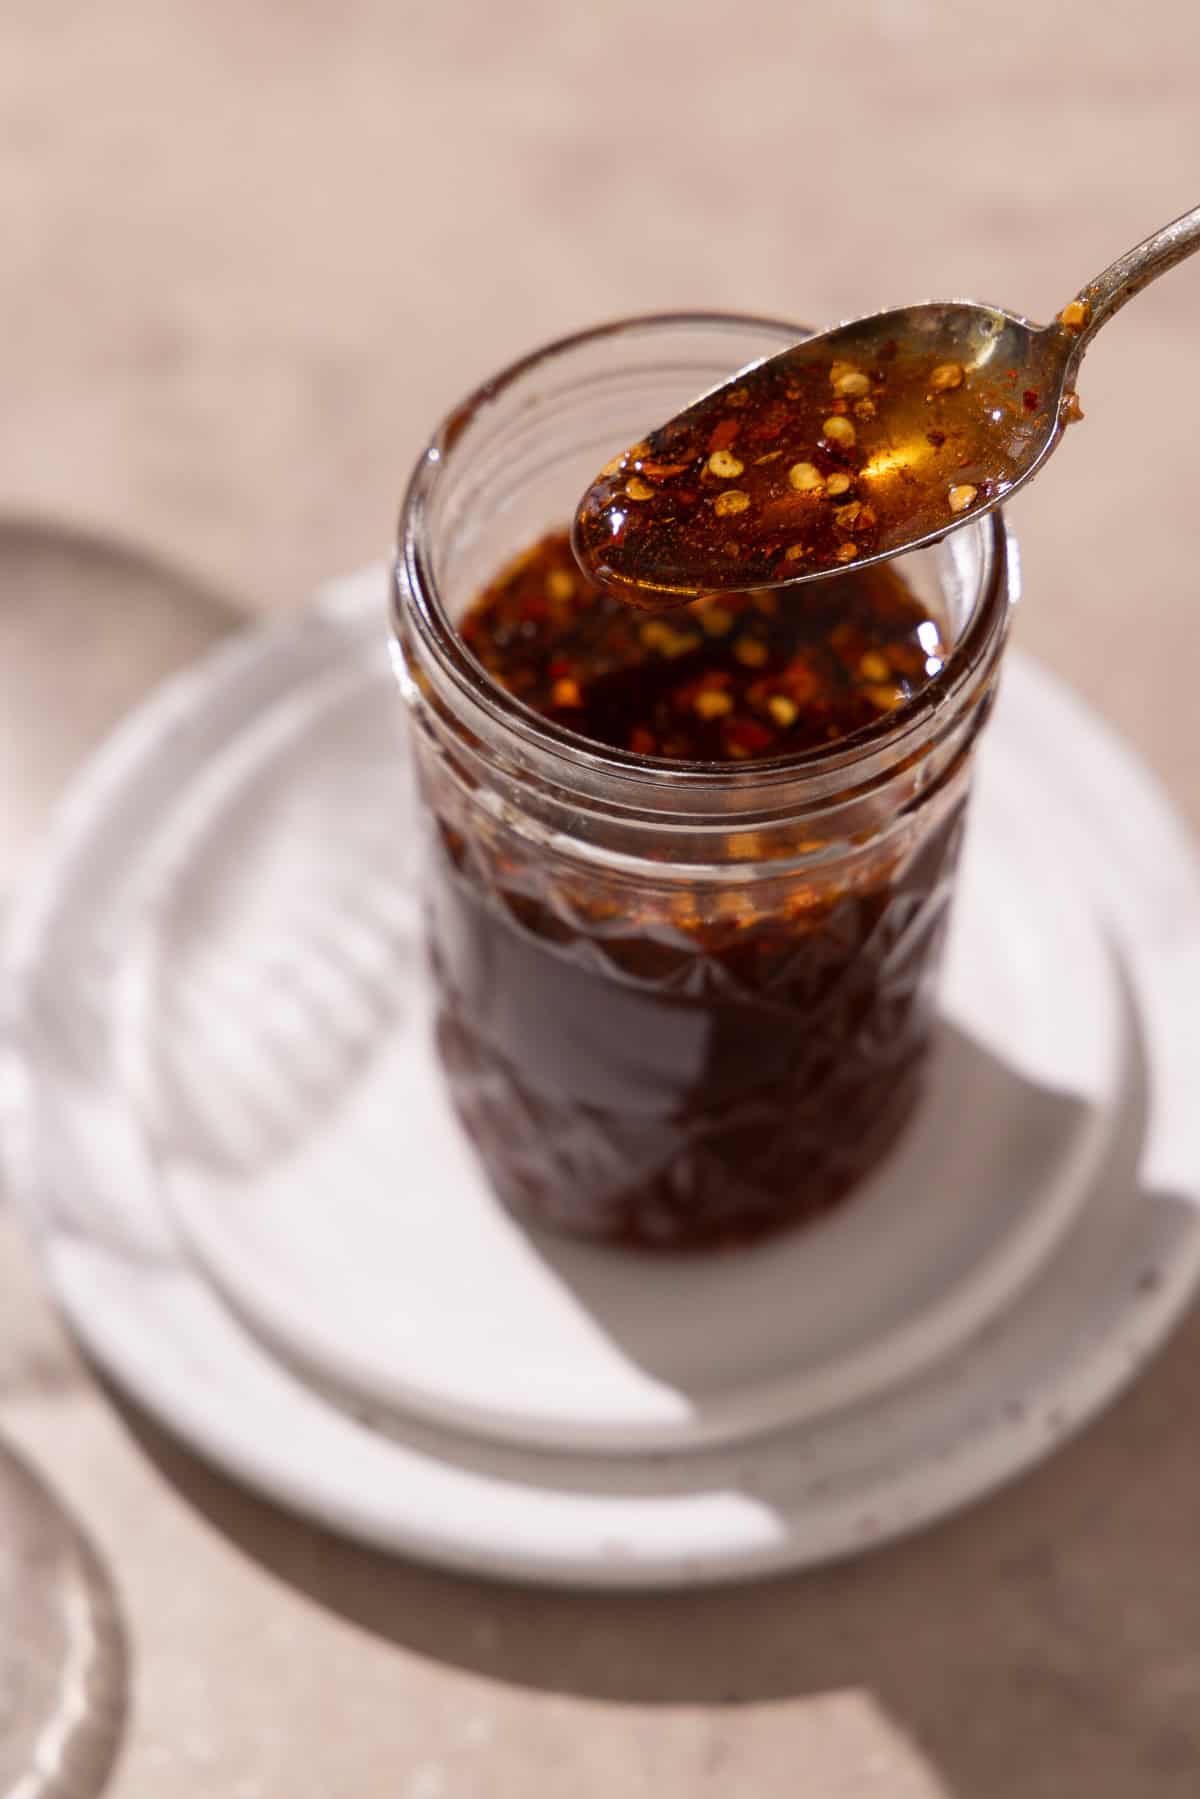 Hot honey is in a mason jar on top of 2 plates. A hand holds a spoon with hot honey.